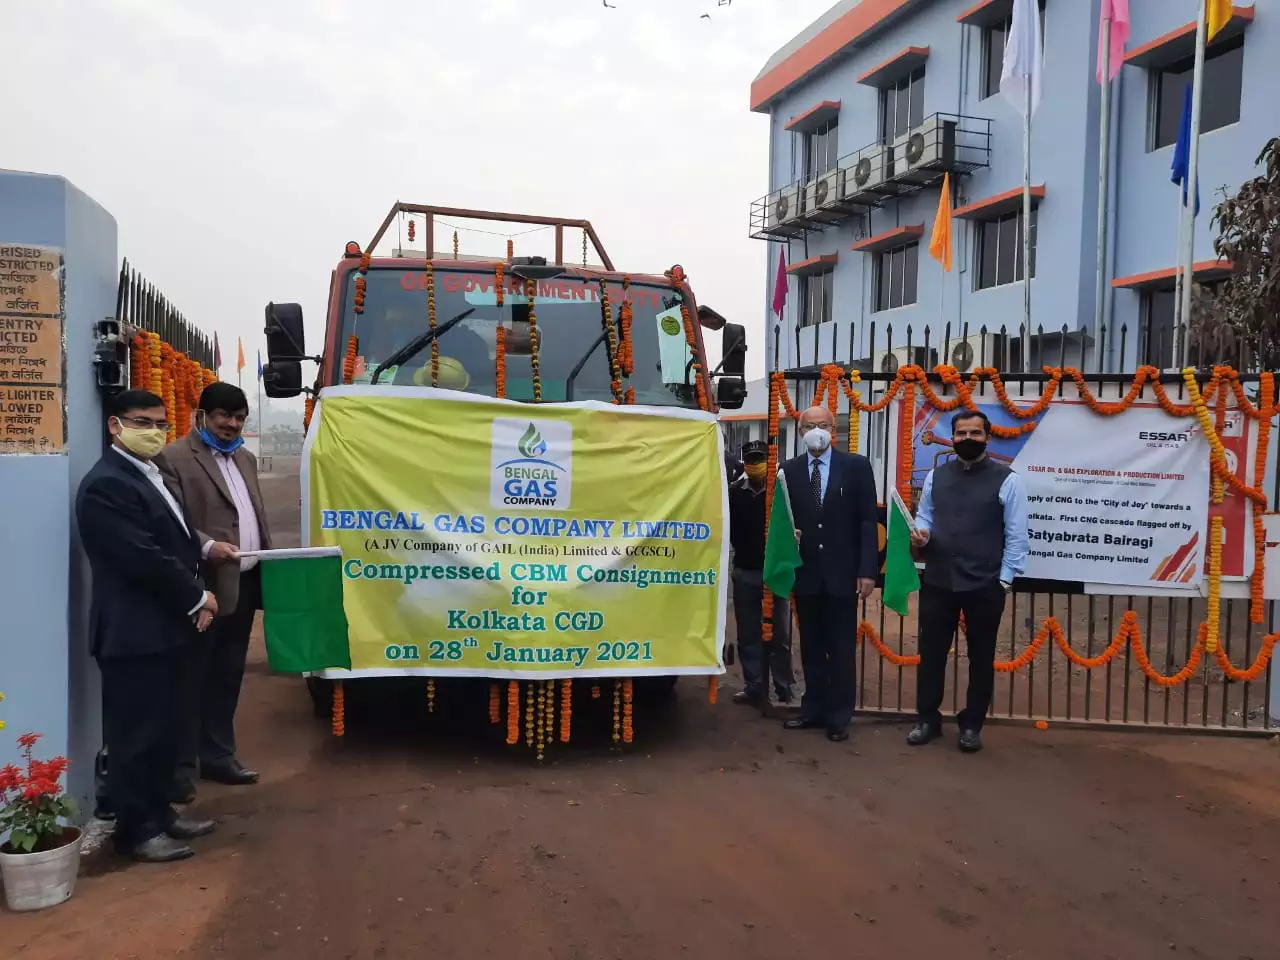 EOGEPL dispatches first CNG to Bengal gas and company for Kolkata